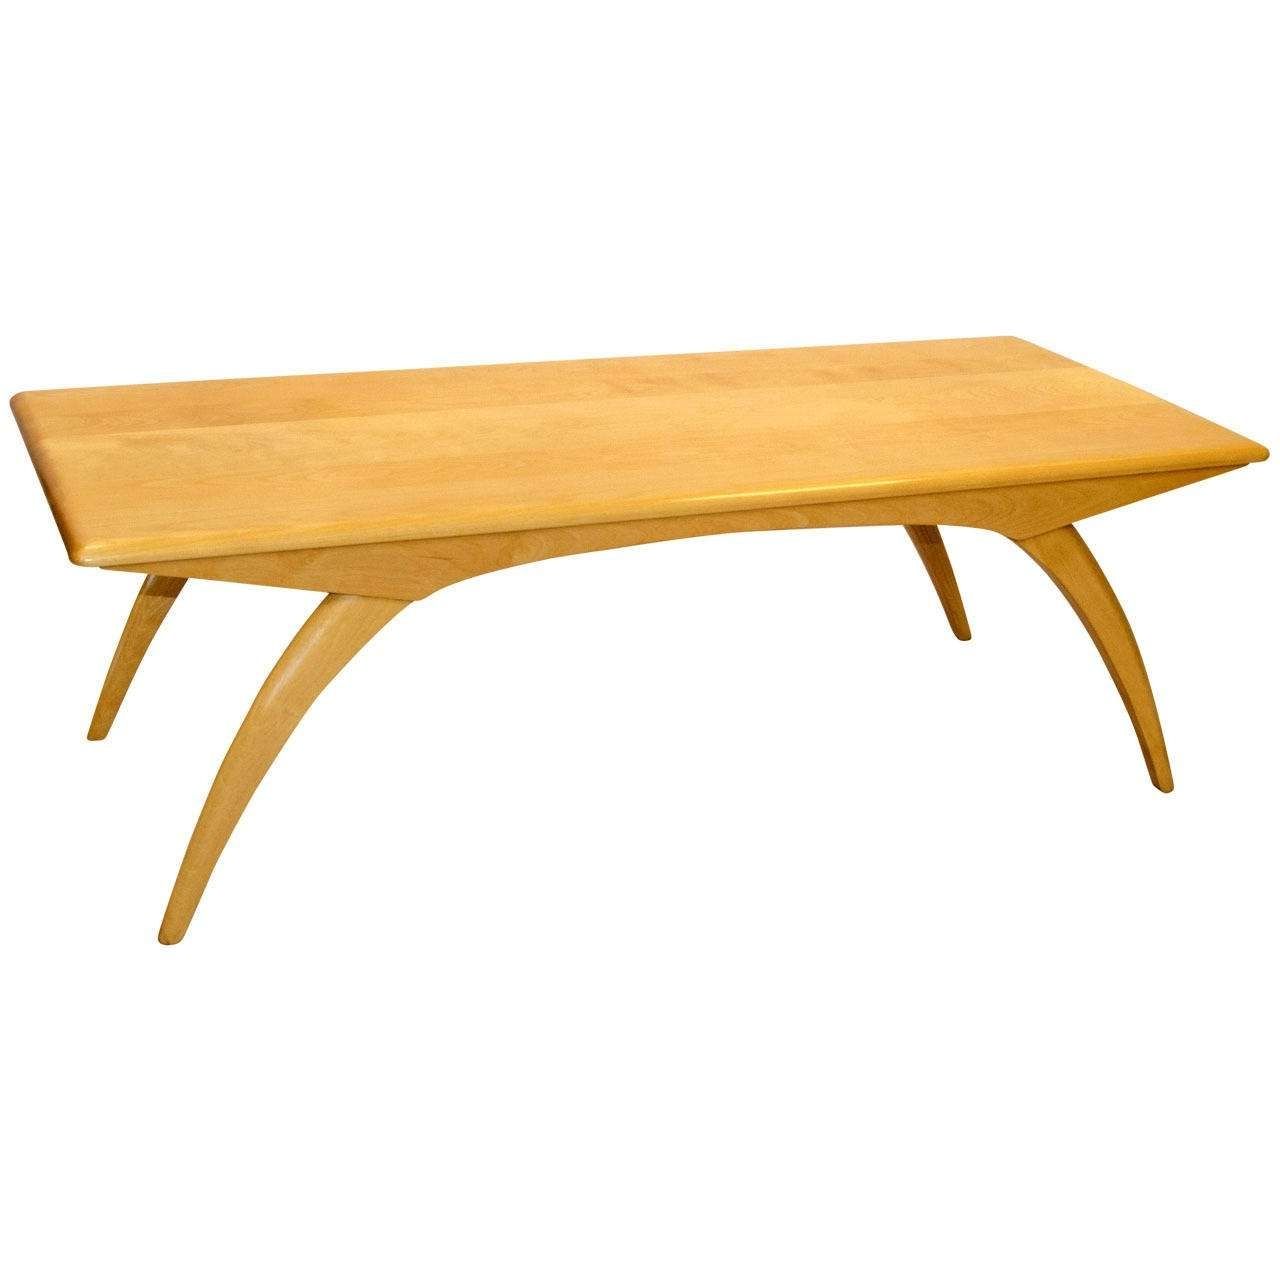 Current Birch Coffee Tables Throughout Mid Century Birch Coffee Table Model M795g, Heywood Wakefield At (View 2 of 20)